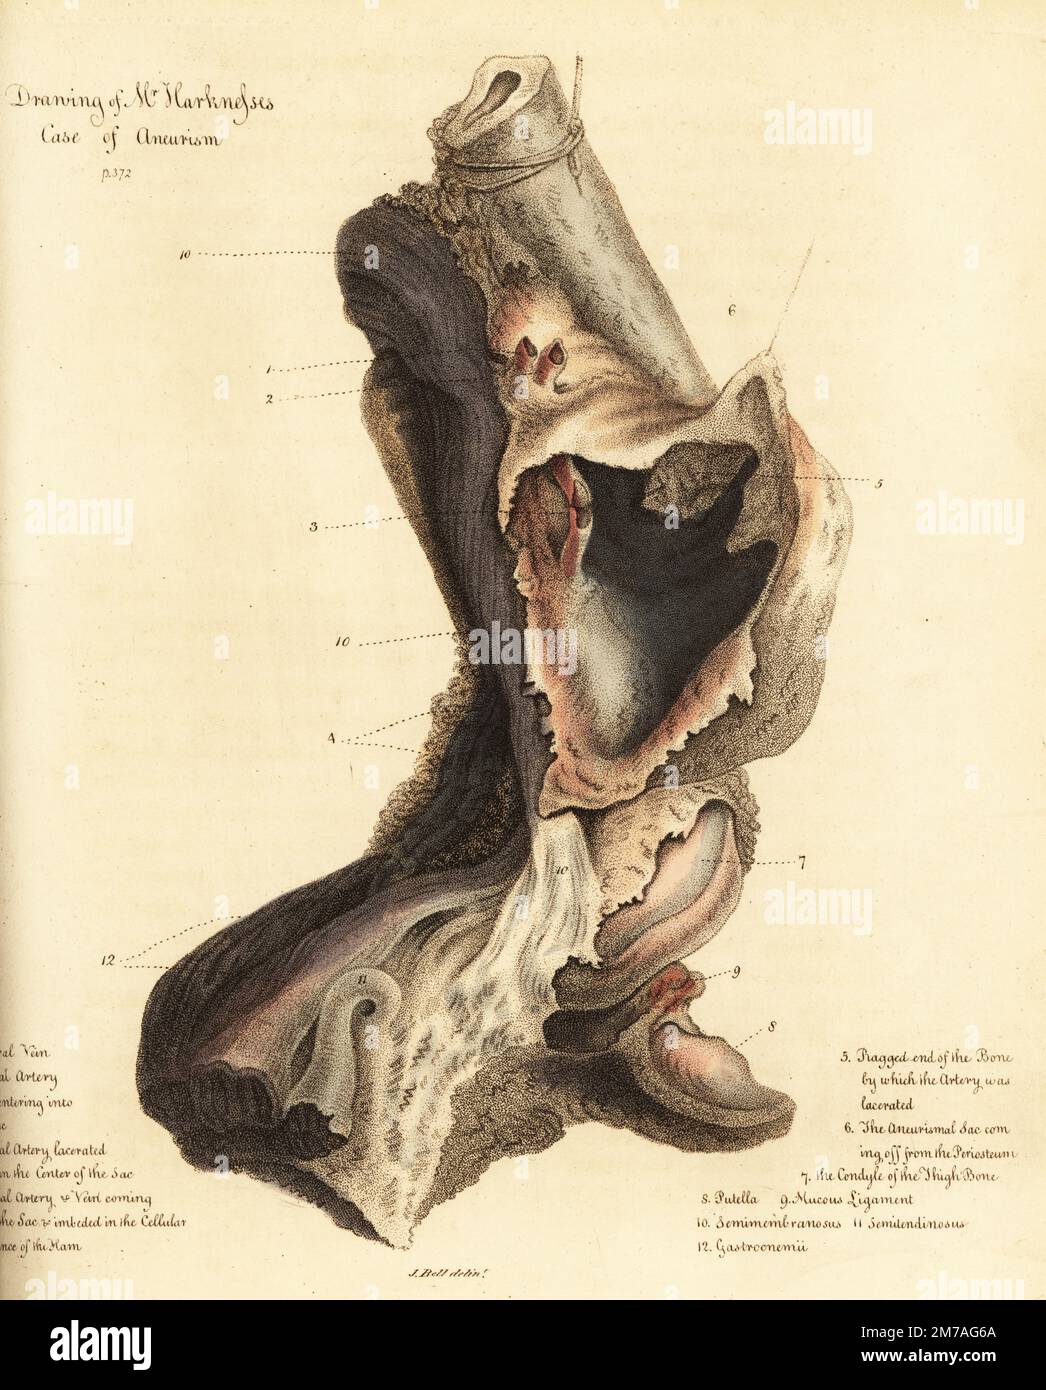 Fatal aneurysmal sac from the broken leg of a man, 1815. The sailor died of gangrene before the leg could be amputated. Drawing of Mr. Harkness's case of aneurism. Femoral vein 1, femoral artery 2, lacerated femoral artery 3, popliteal artery 4, ragged end of the bone 5, aneurysmal sac 6, condyle of the thigh bone 7, putella 8, mucous ligament 9, semimembranosus 10, semilendinosus 11, gastroenemii 12. Handcoloured copperplate engraving by after an illustration by John Bell from his own Principles of Surgery, as they Relate to Wounds, Ulcers and Fistulas, Longman,  Hurst, Rees, Orme and Brown, Stock Photo